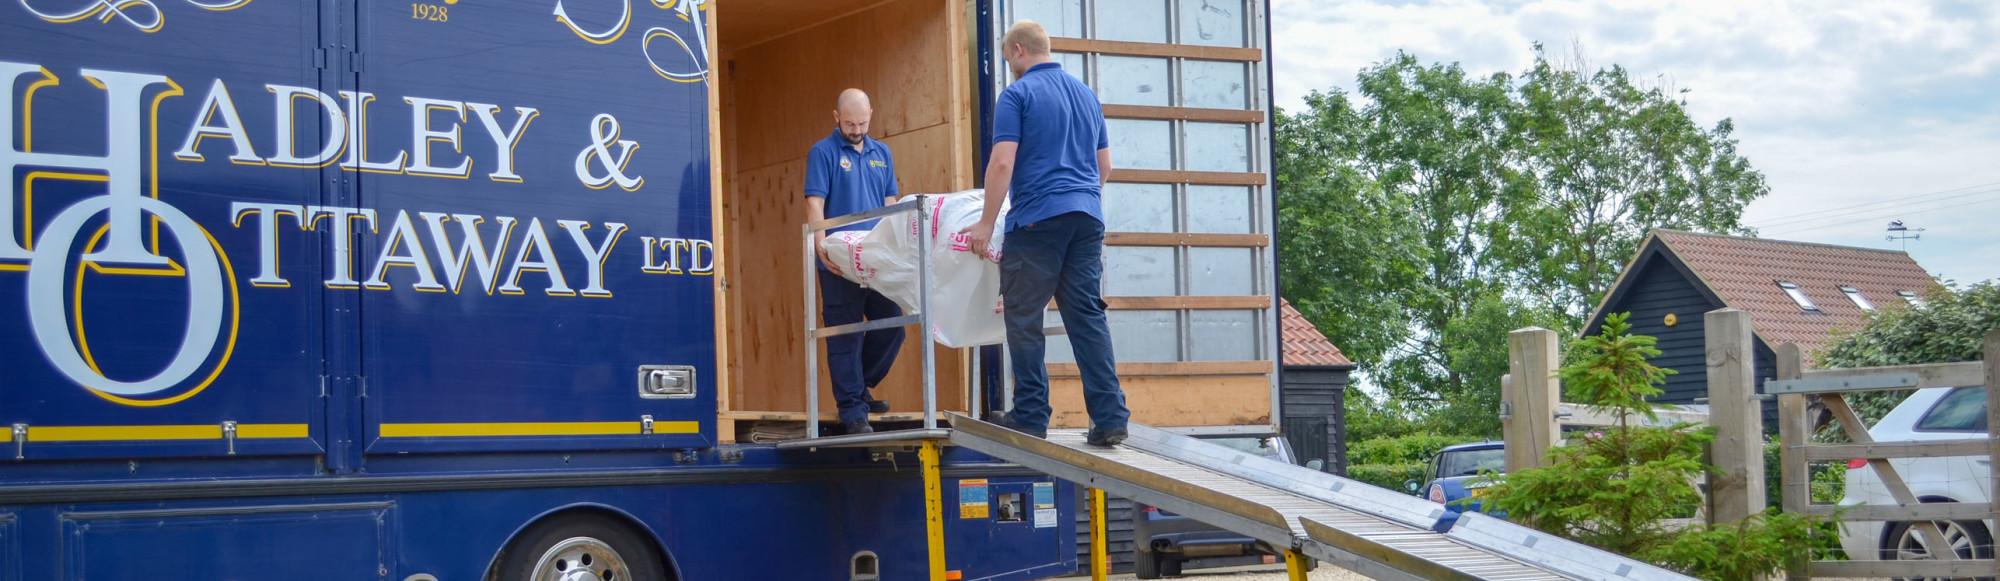 hadley and ottaway removals ely